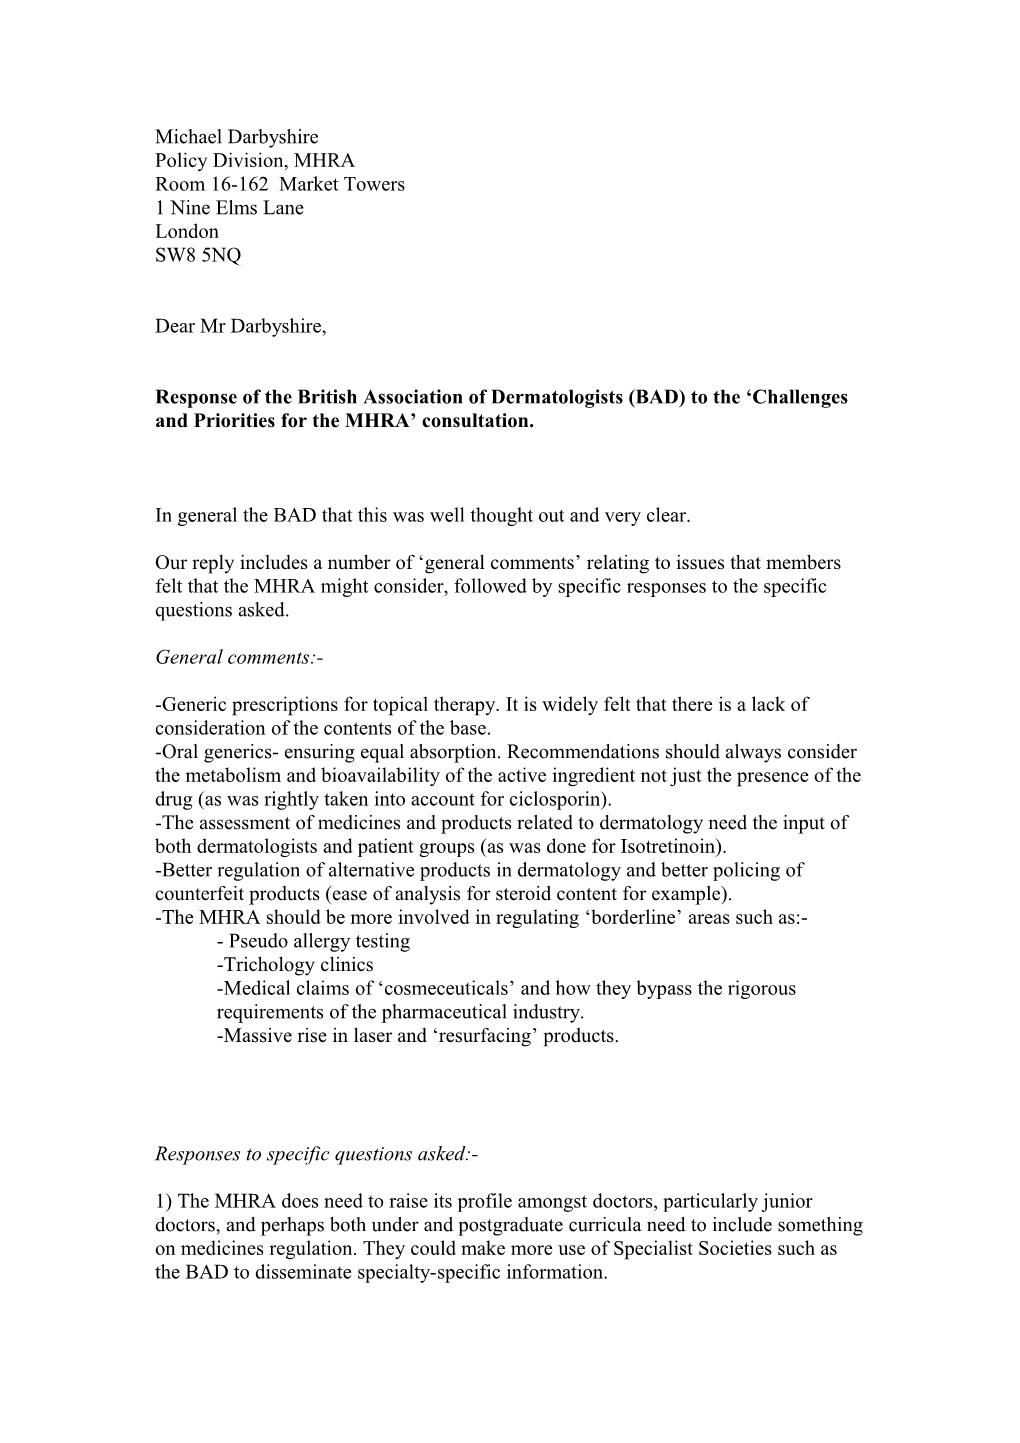 Response of the British Association of Dermatologists (BAD) to the Challenges and Priorities